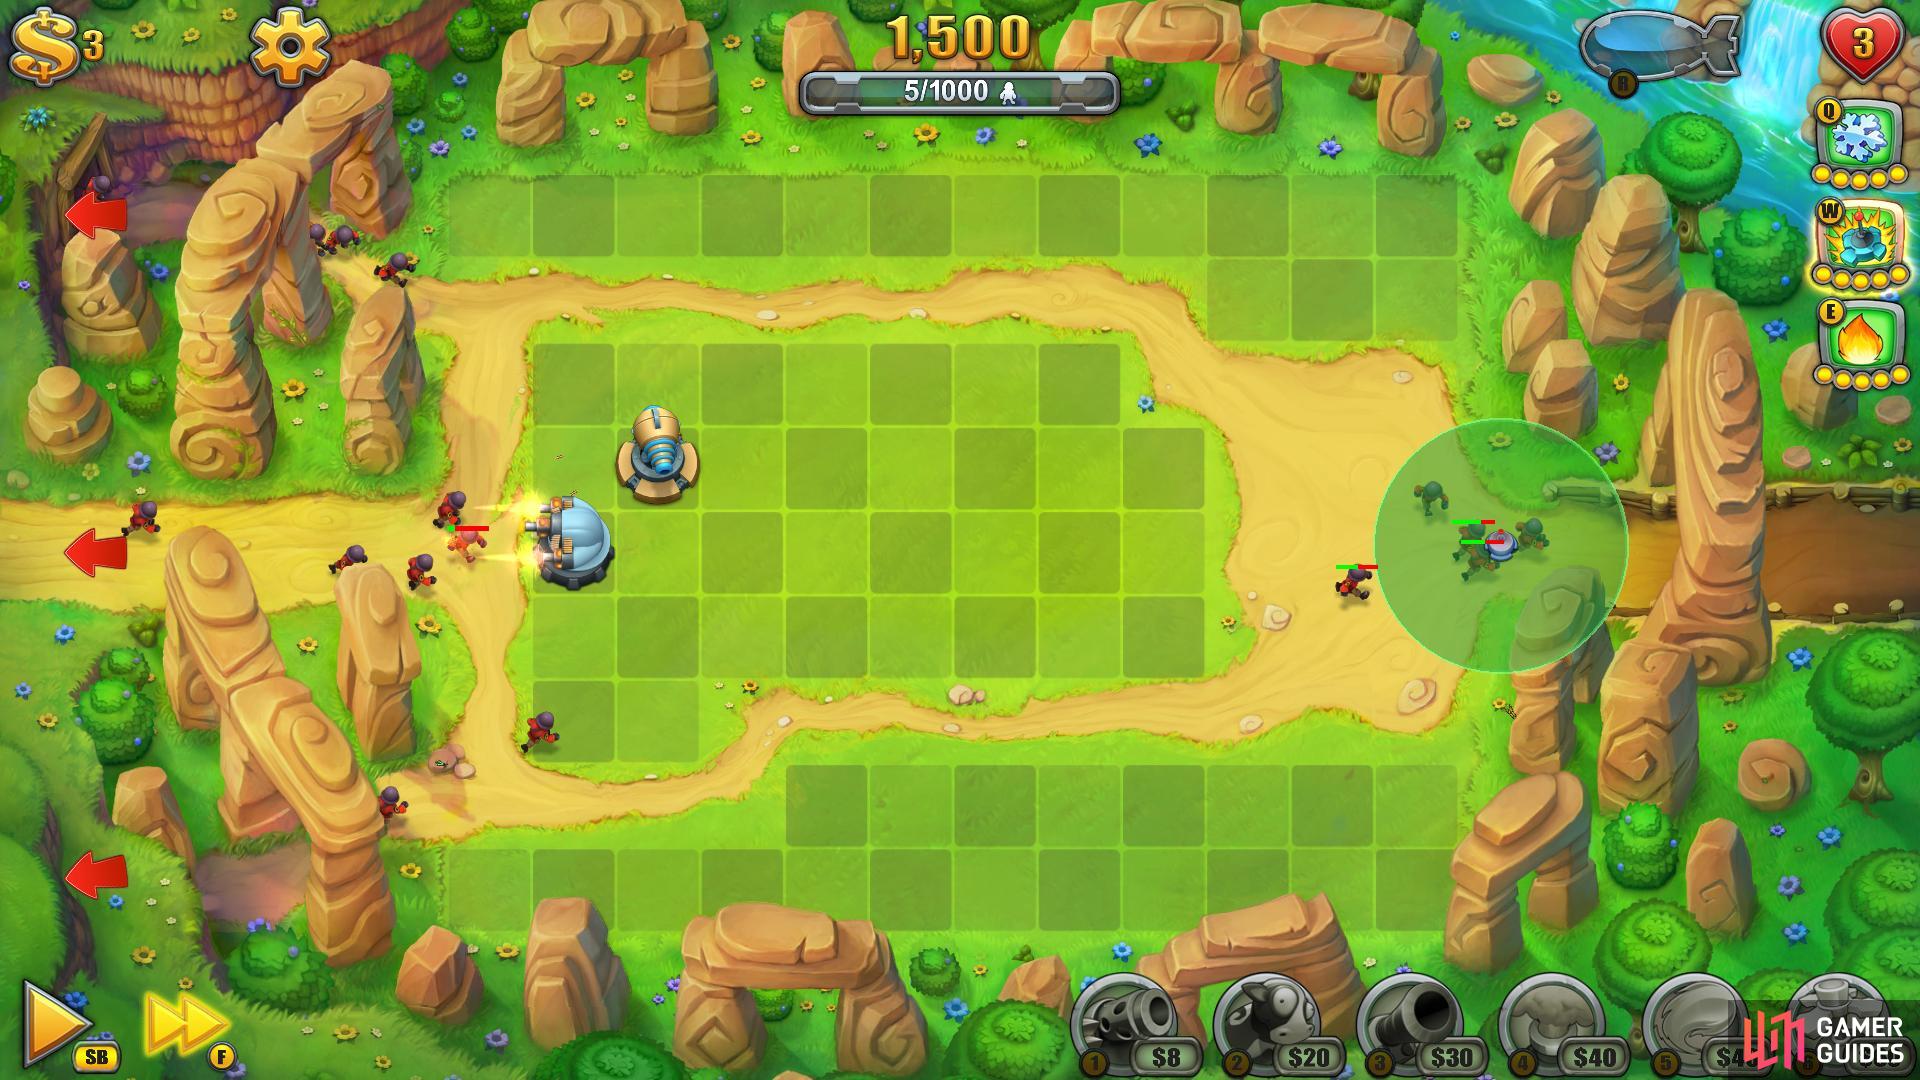 Fieldrunners' Delivers a Very Polished Tower Defense Game